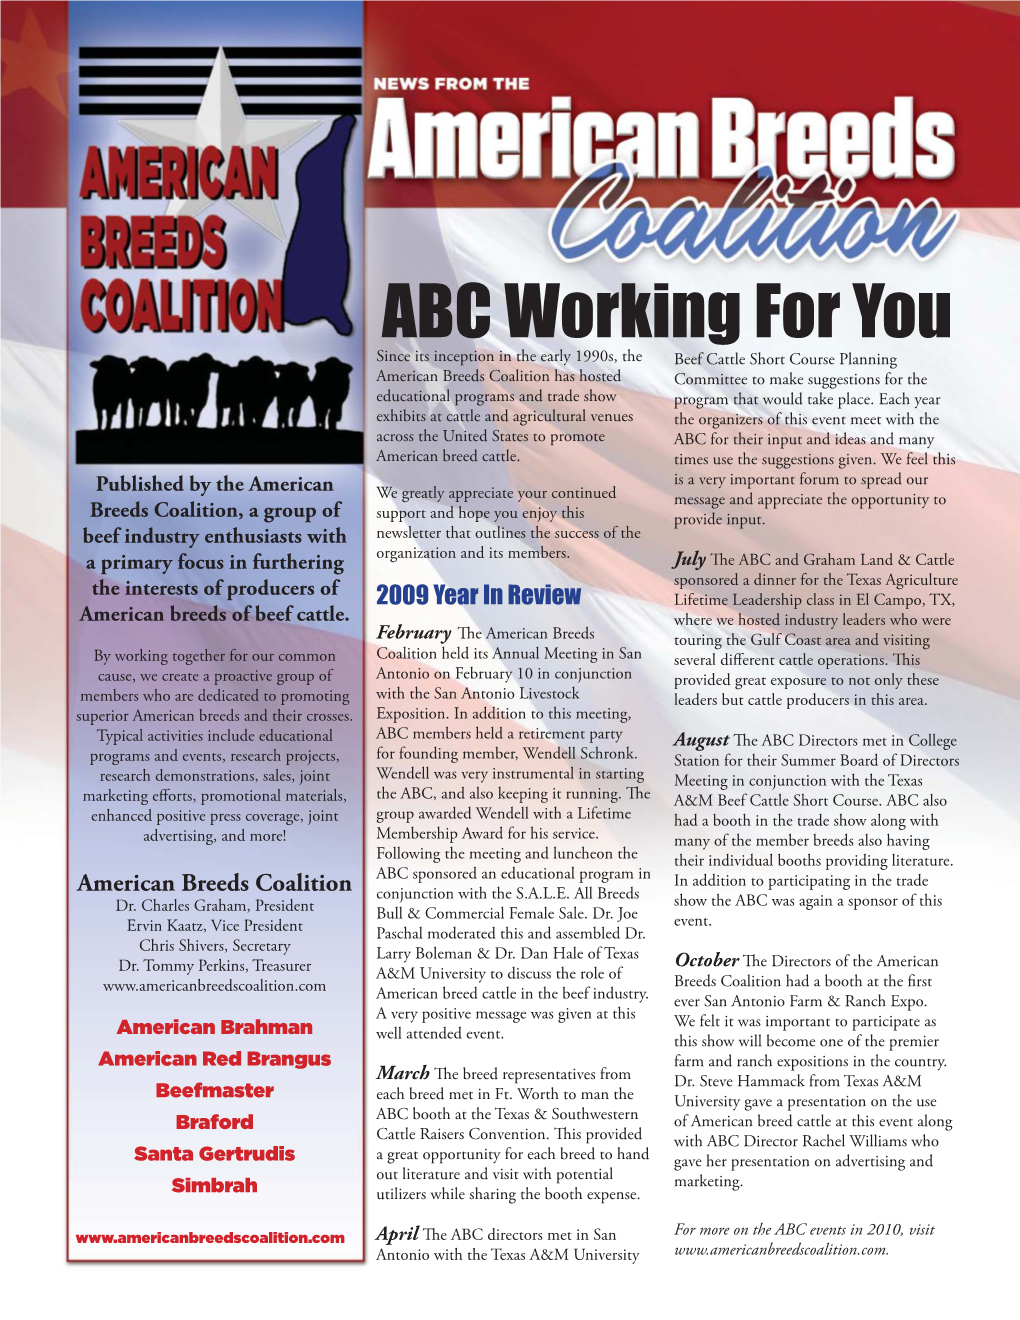 American Breeds Coalition Has Hosted Committee to Make Suggestions for the Educational Programs and Trade Show Program That Would Take Place